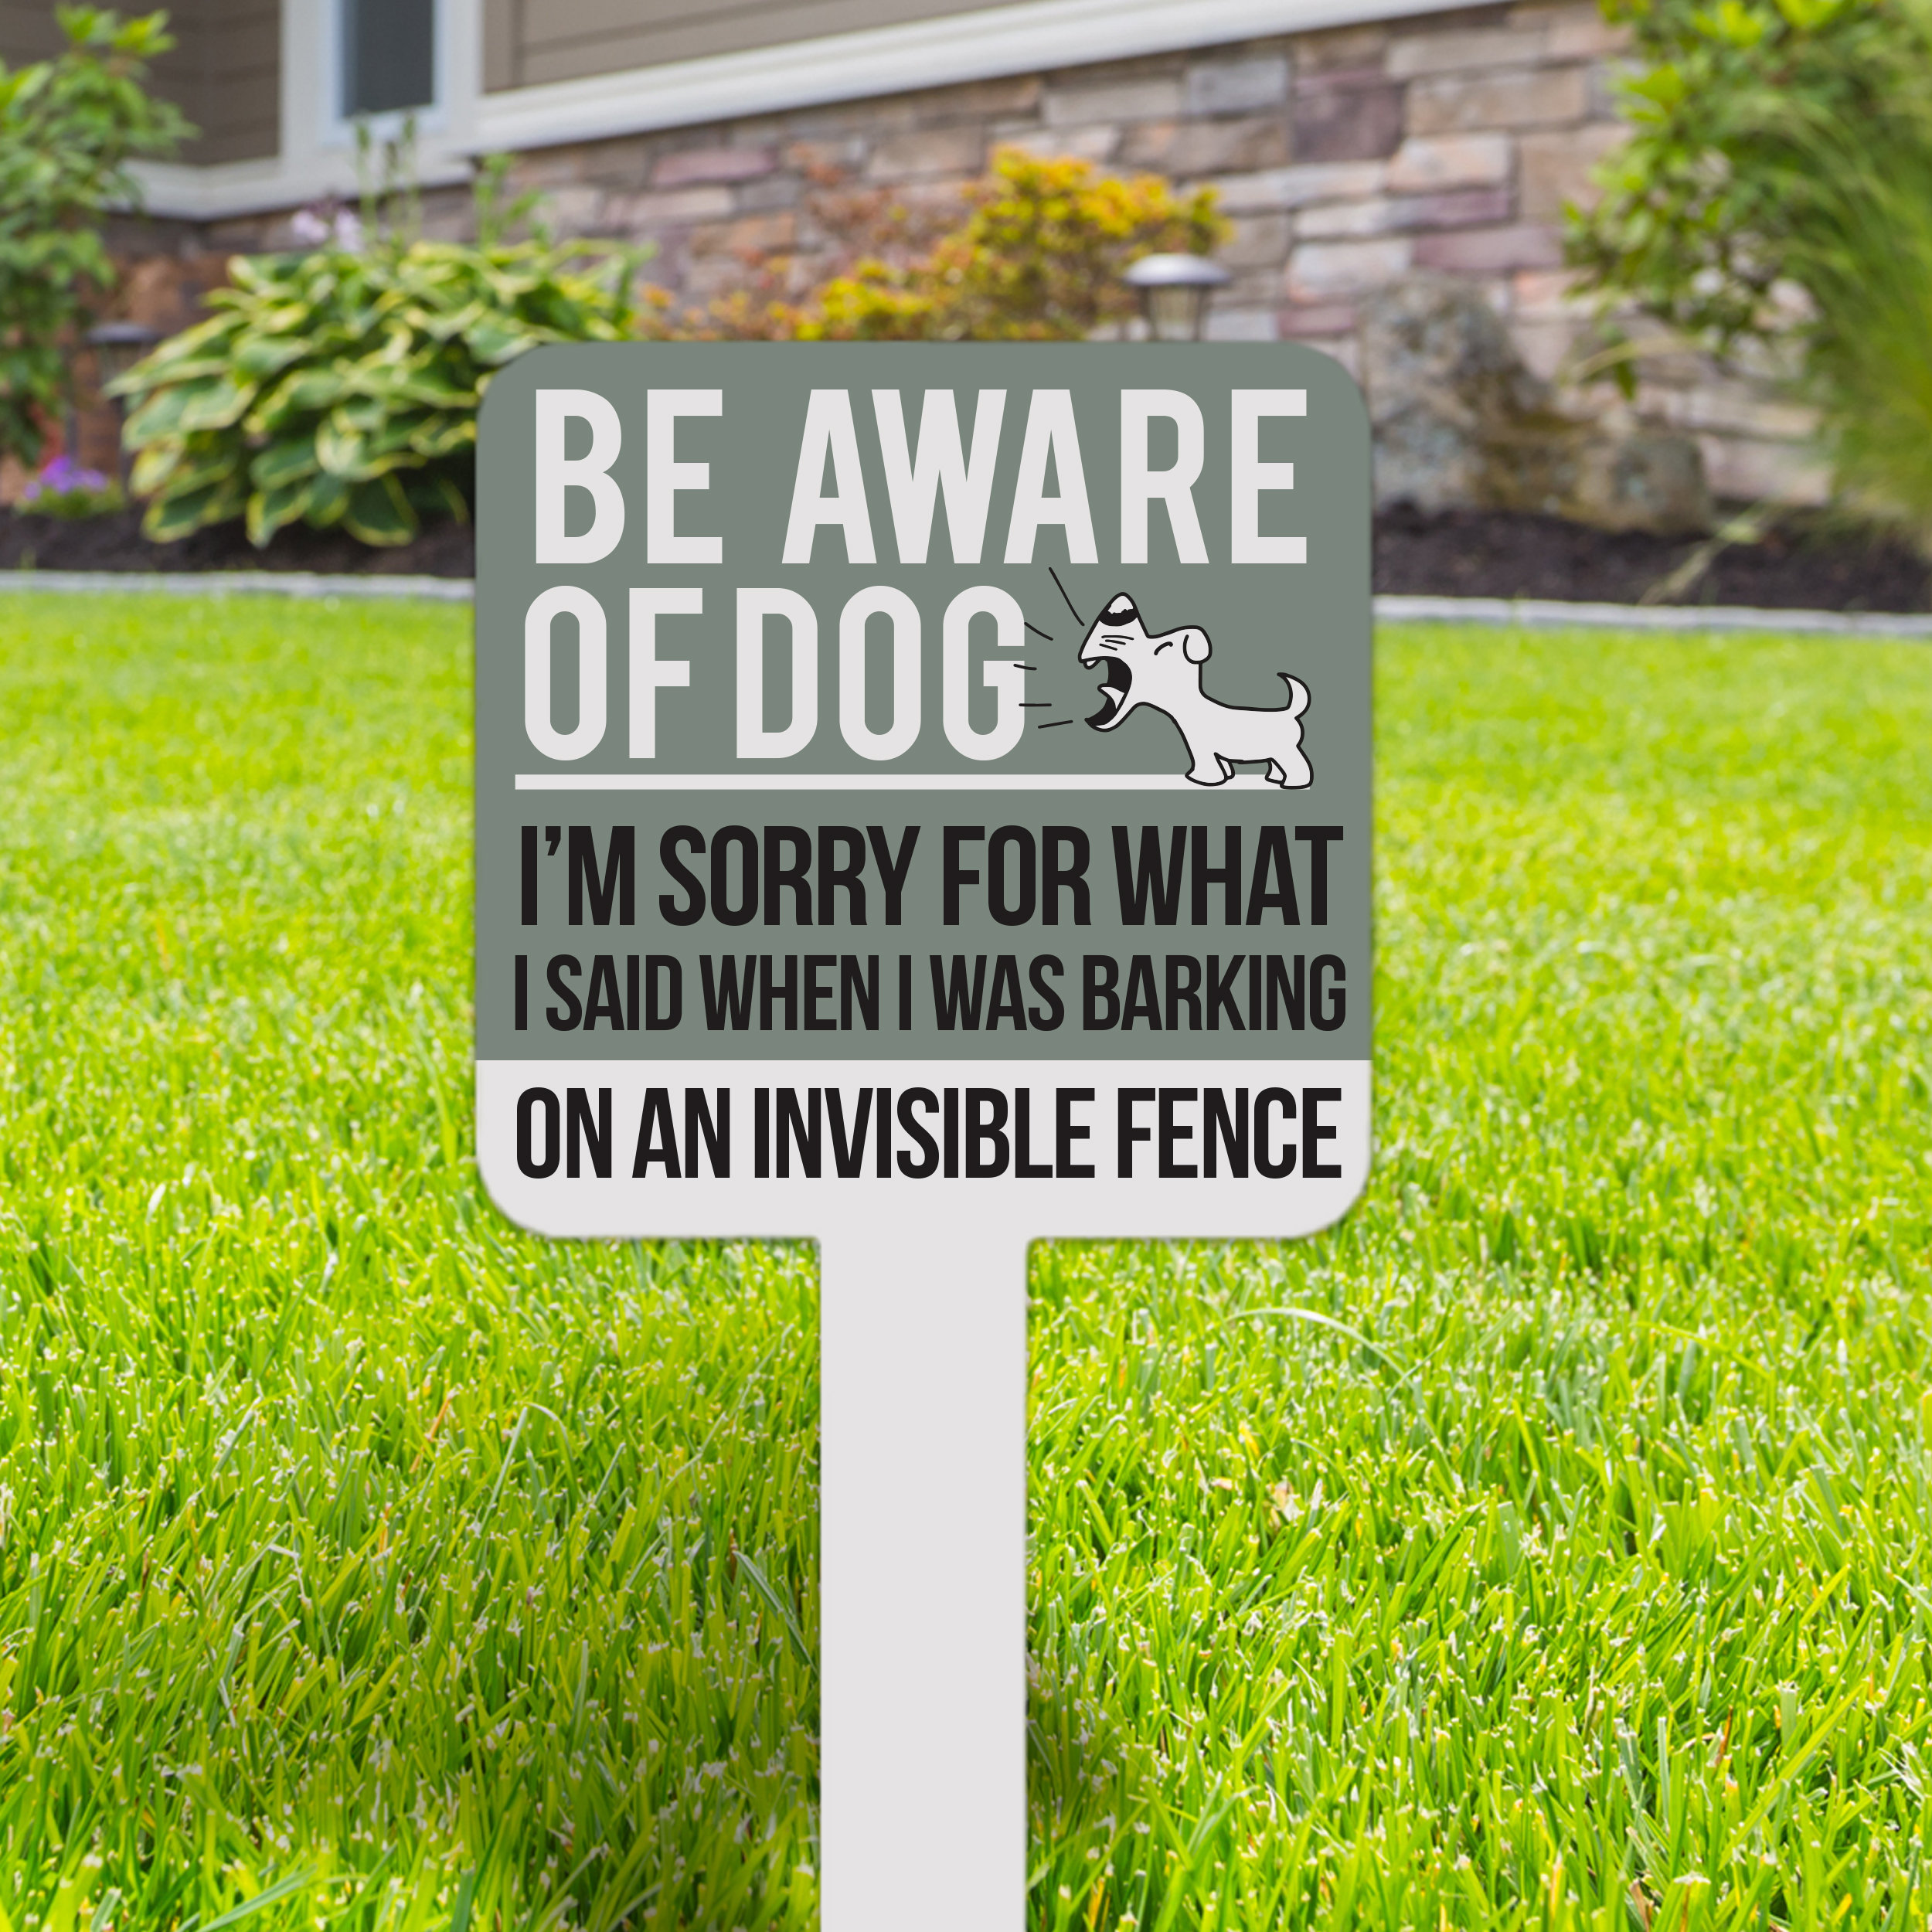 can a small dog use an invisible fence